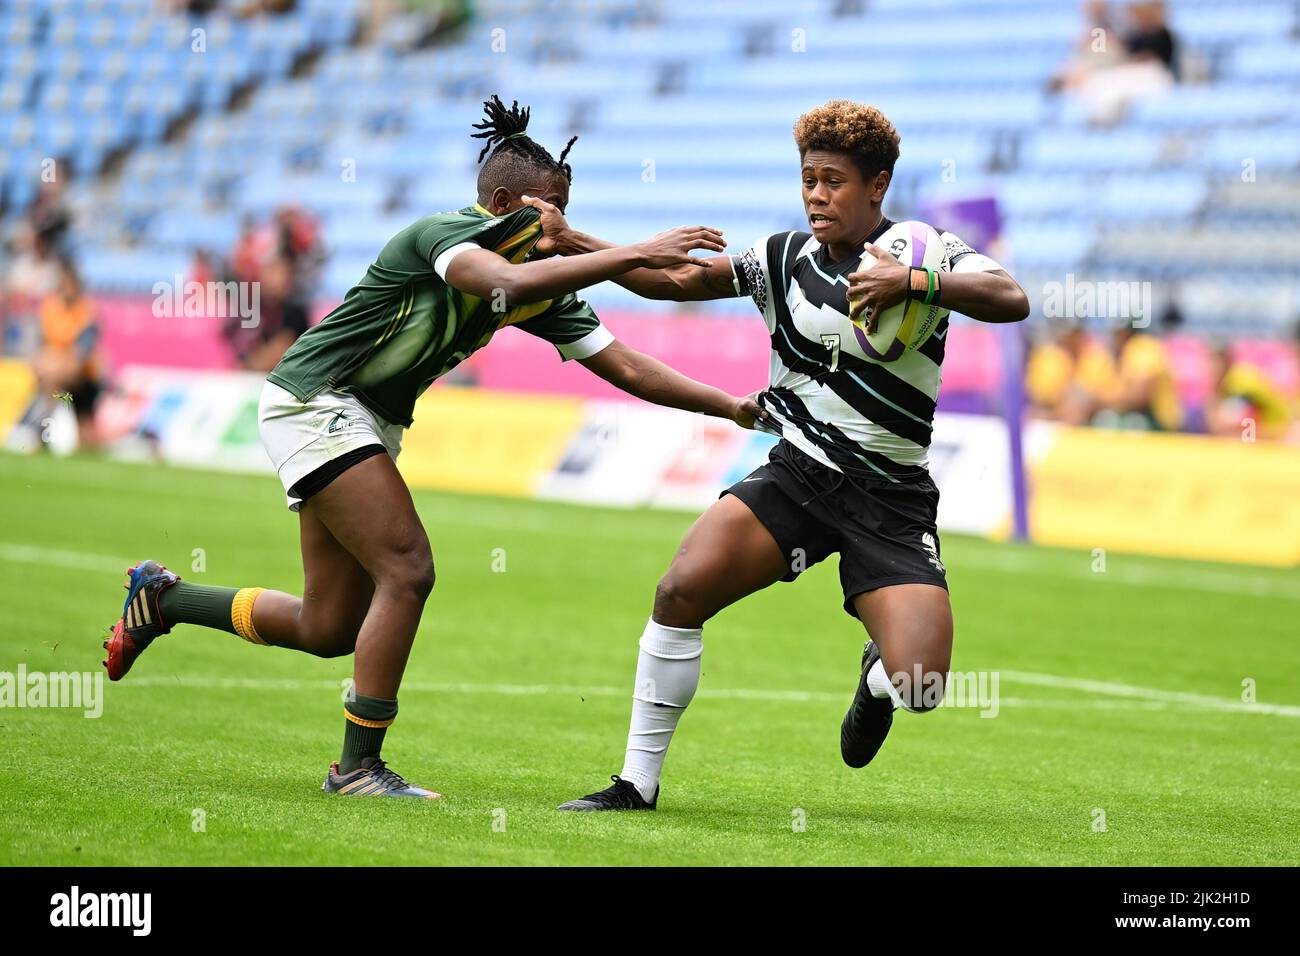 Lavena Cavuru of Fiji is tackled during the Rugby Sevens at the Commonwealth Games at Coventry